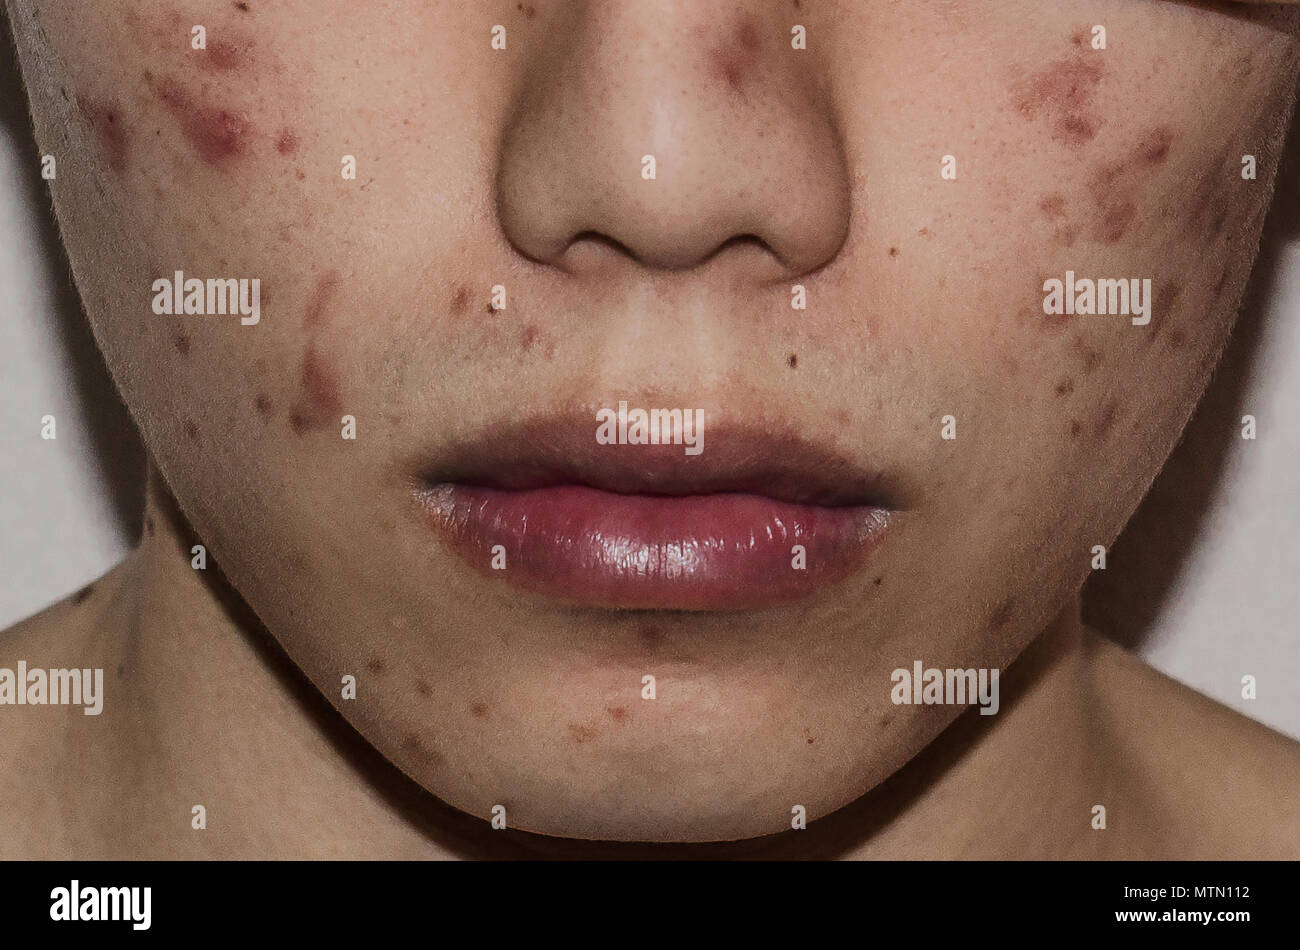 Close up of Acne on the skin, Acne on the face caused by Hormone, Acne inflammation and Wrinkle on the face skin Stock Photo